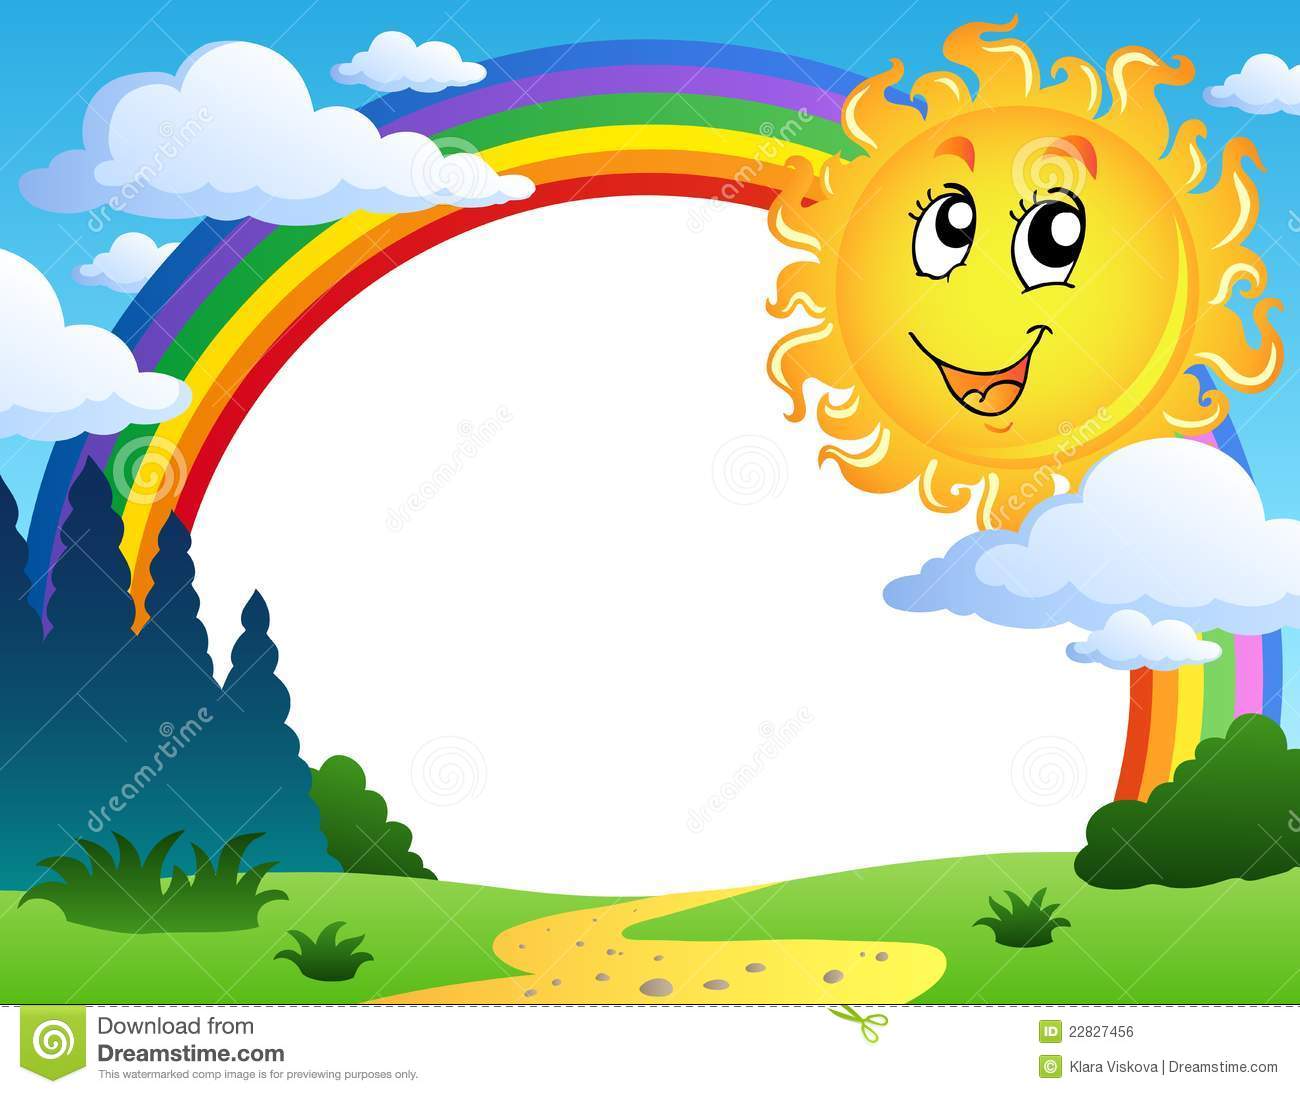 Landscape With Rainbow And Sun 2 Royalty Free Stock Image   Image